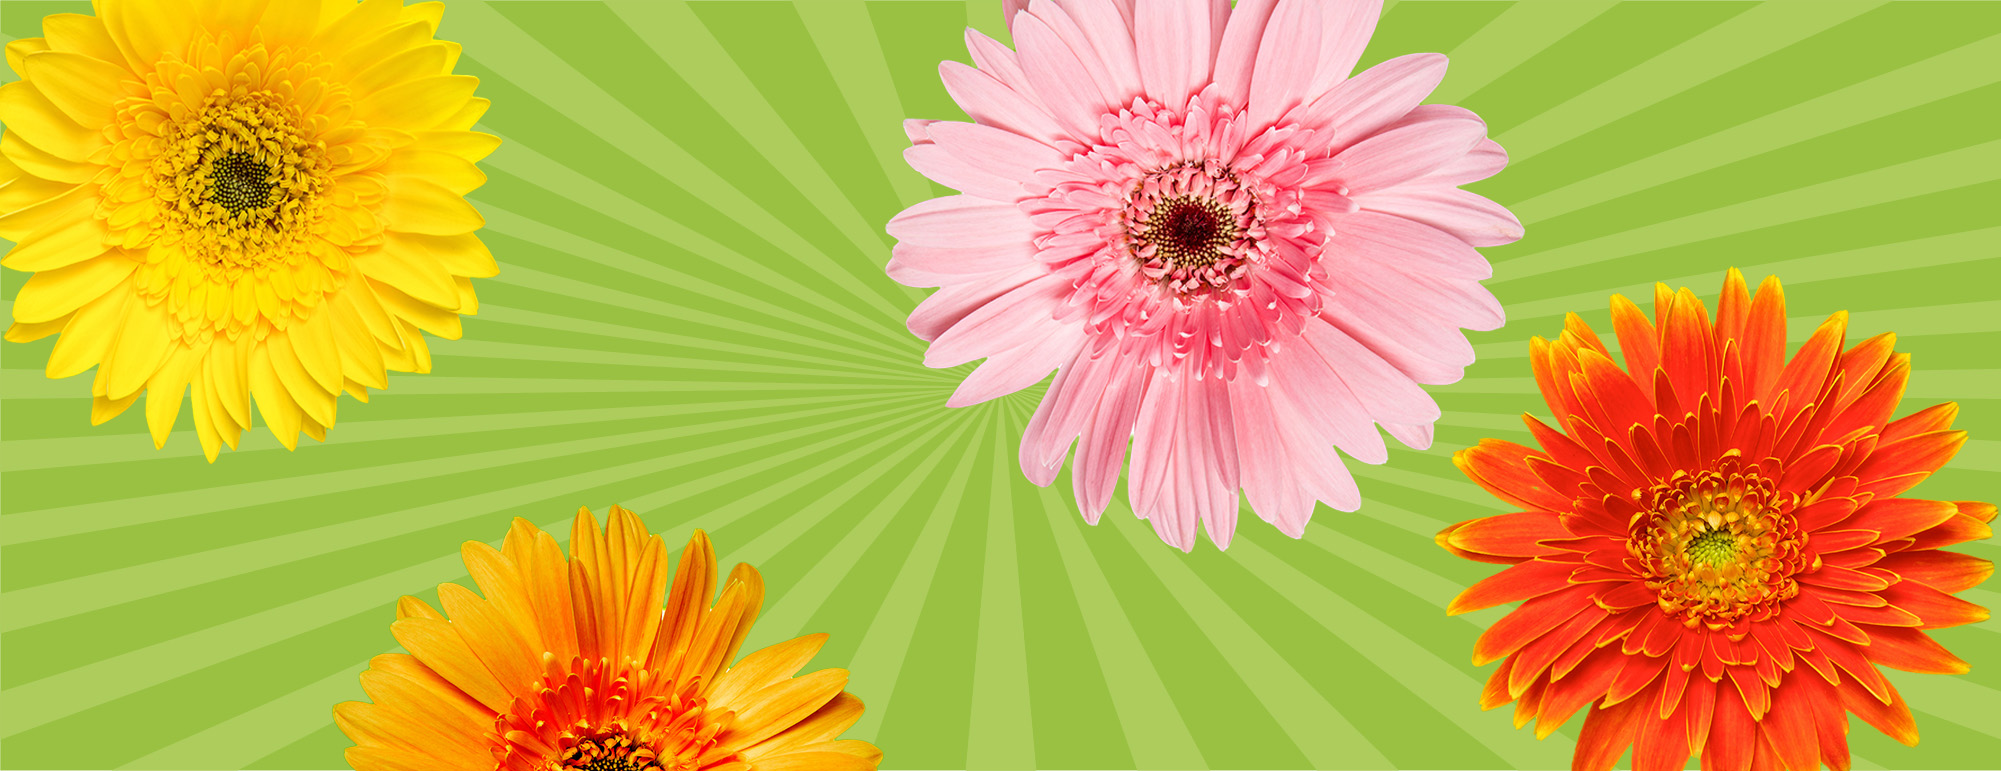 SPRINGBGBannerNORED